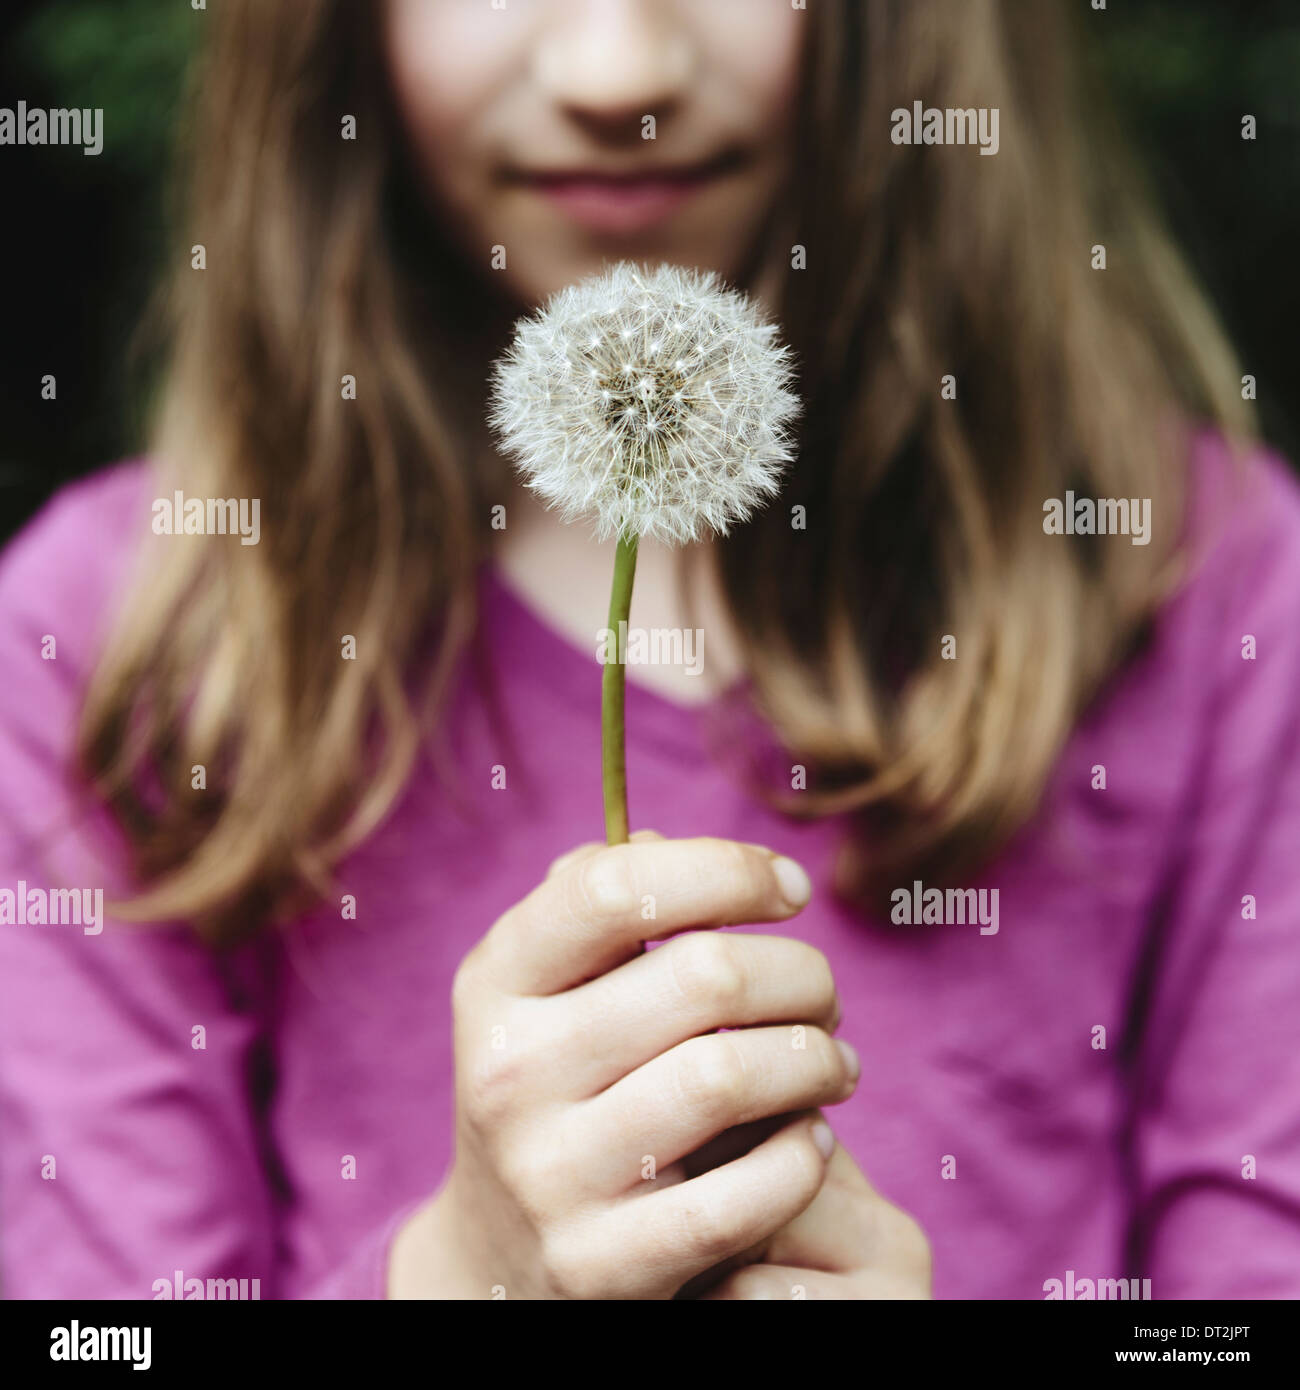 A ten year old girl holding a dandelion clock seedhead on a long stem Stock Photo